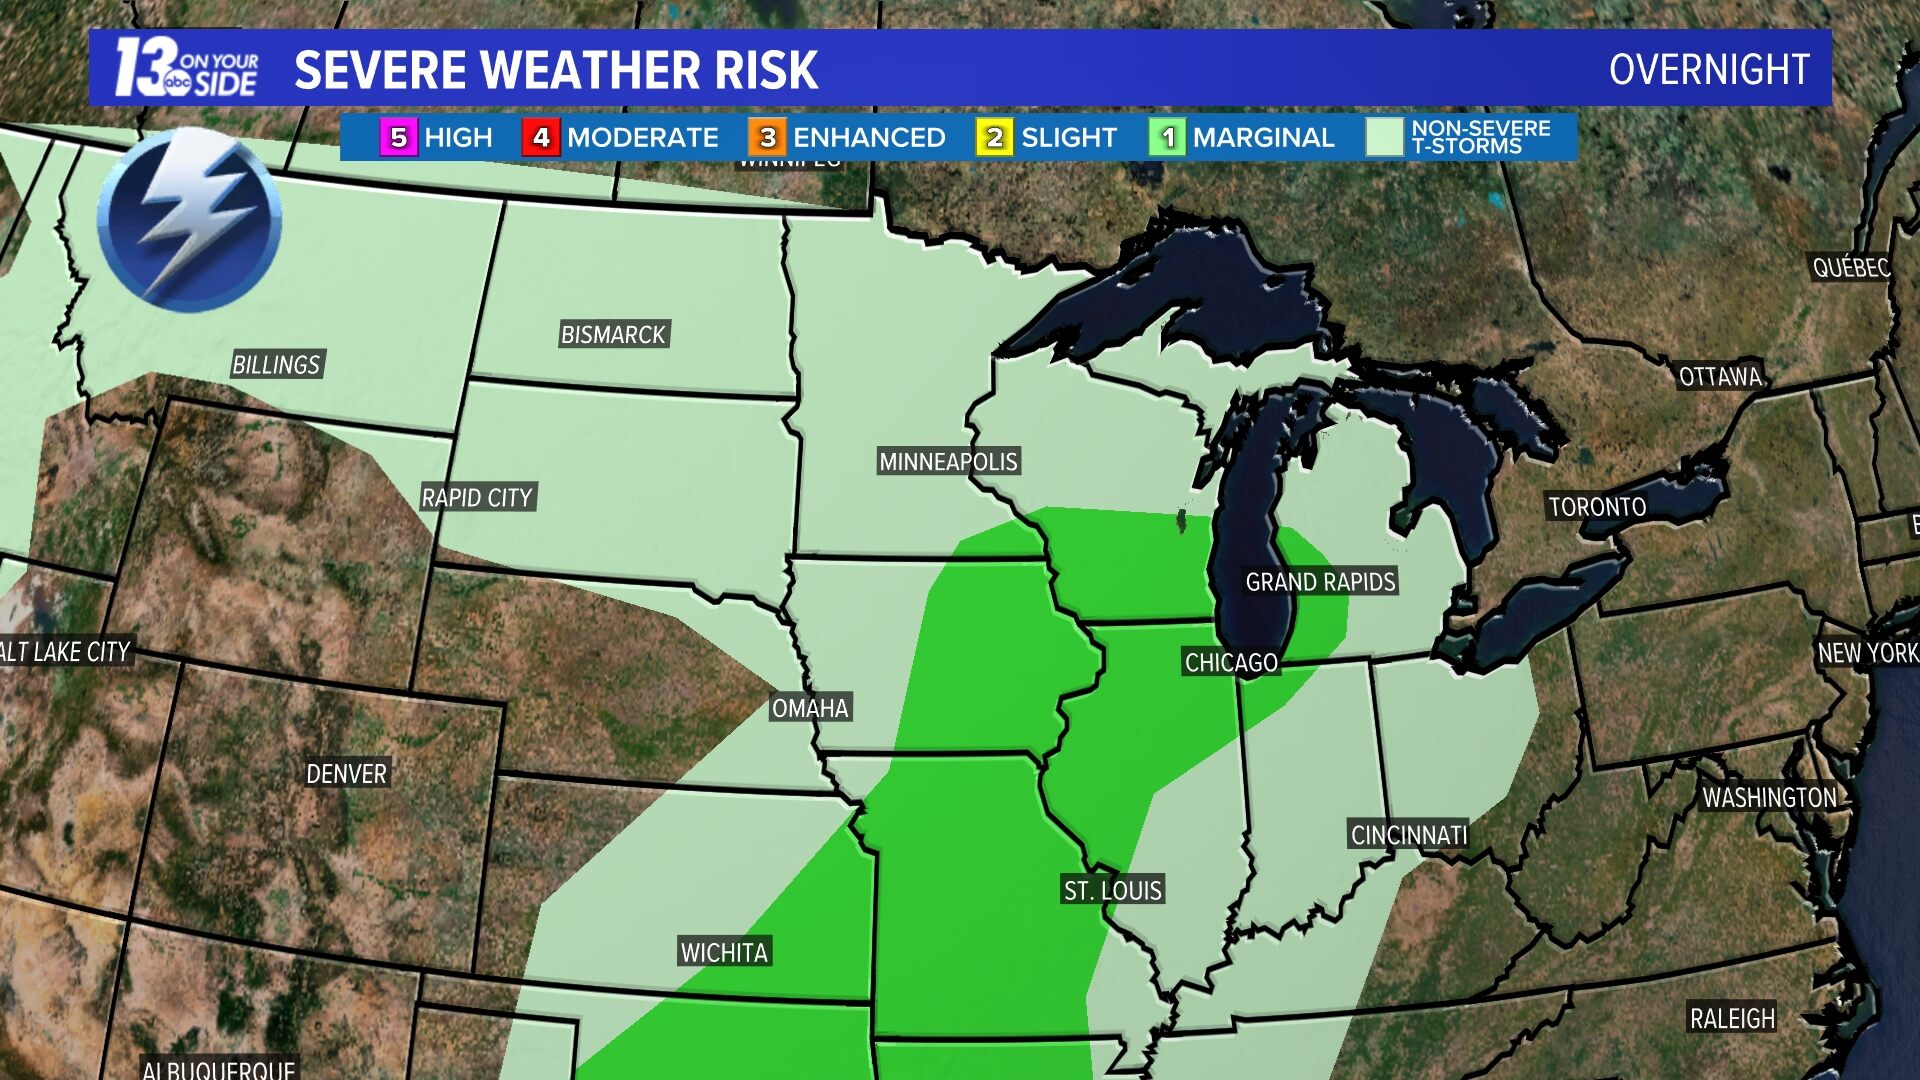 Today's Severe Weather Risk